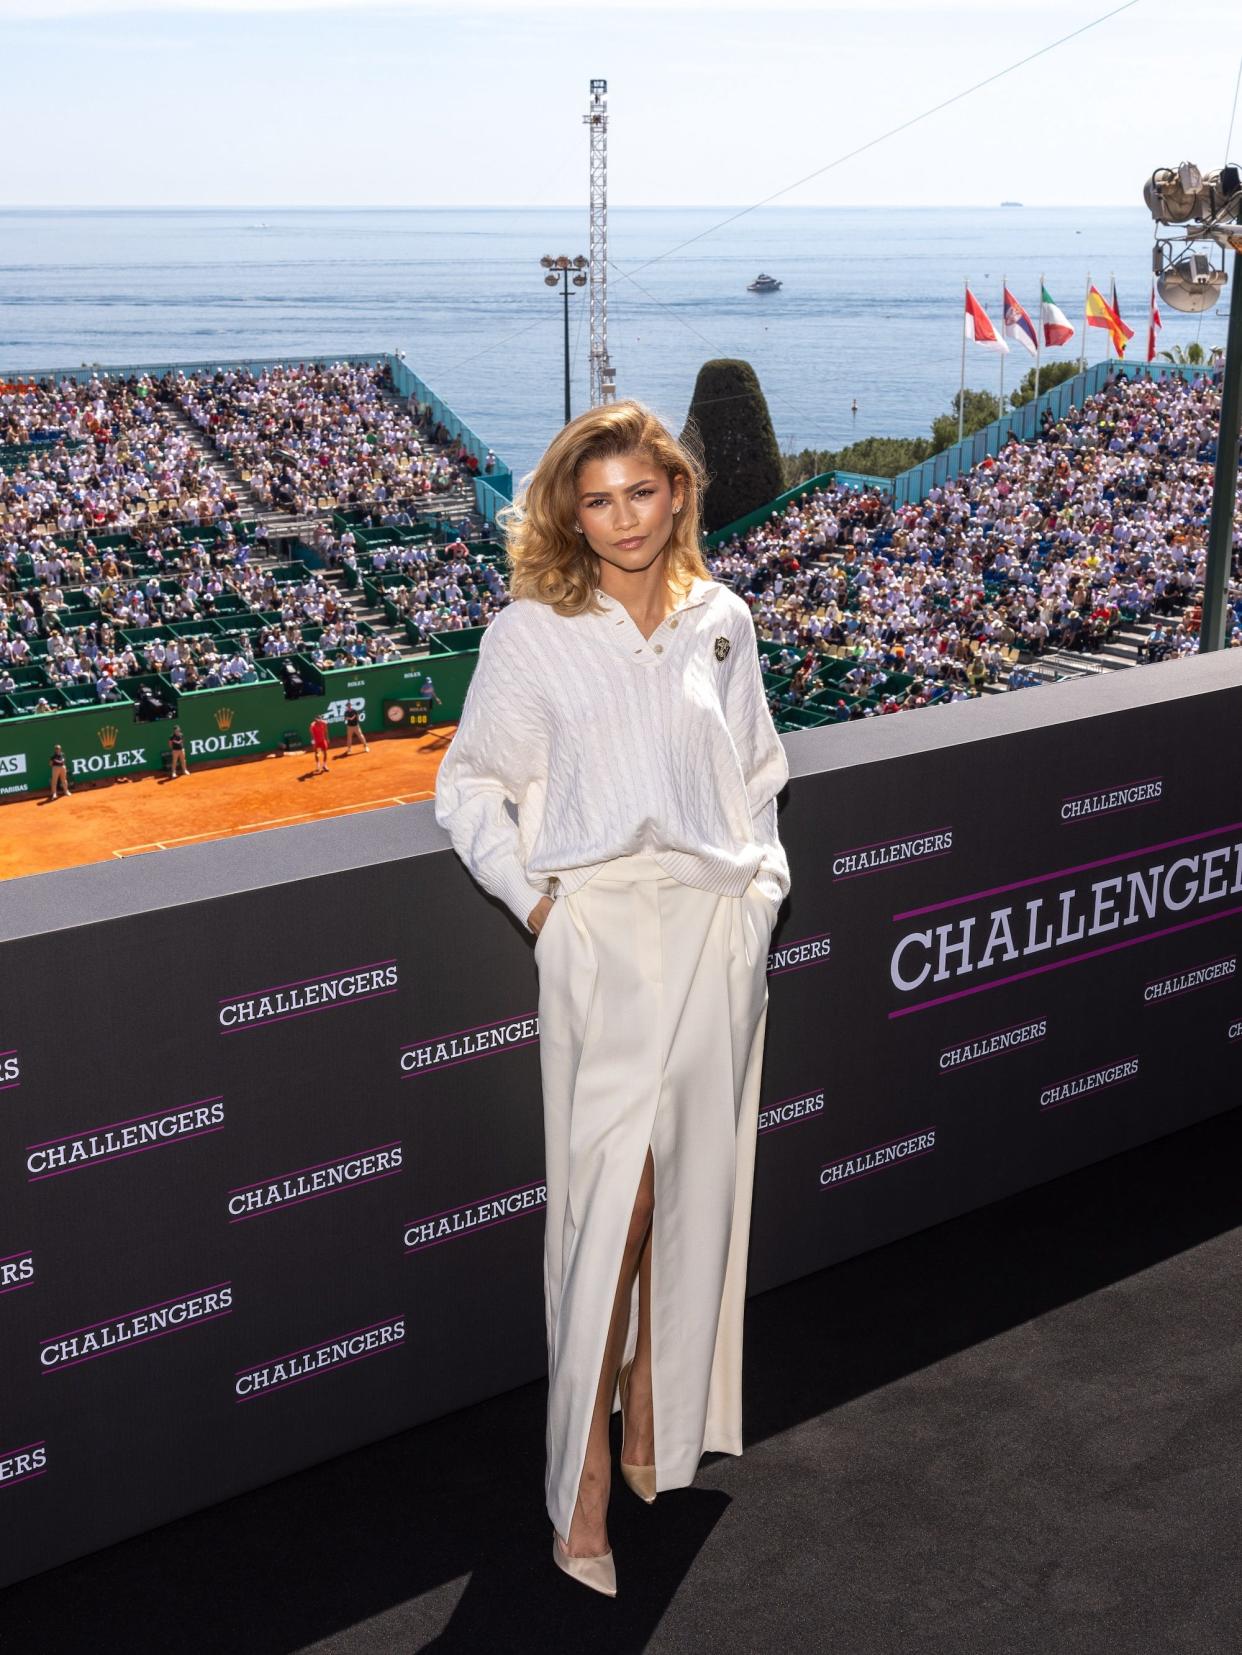 Zendaya attends a "Challengers" photocall at the Rolex Monte-Carlo Masters in Monaco in April 2024.